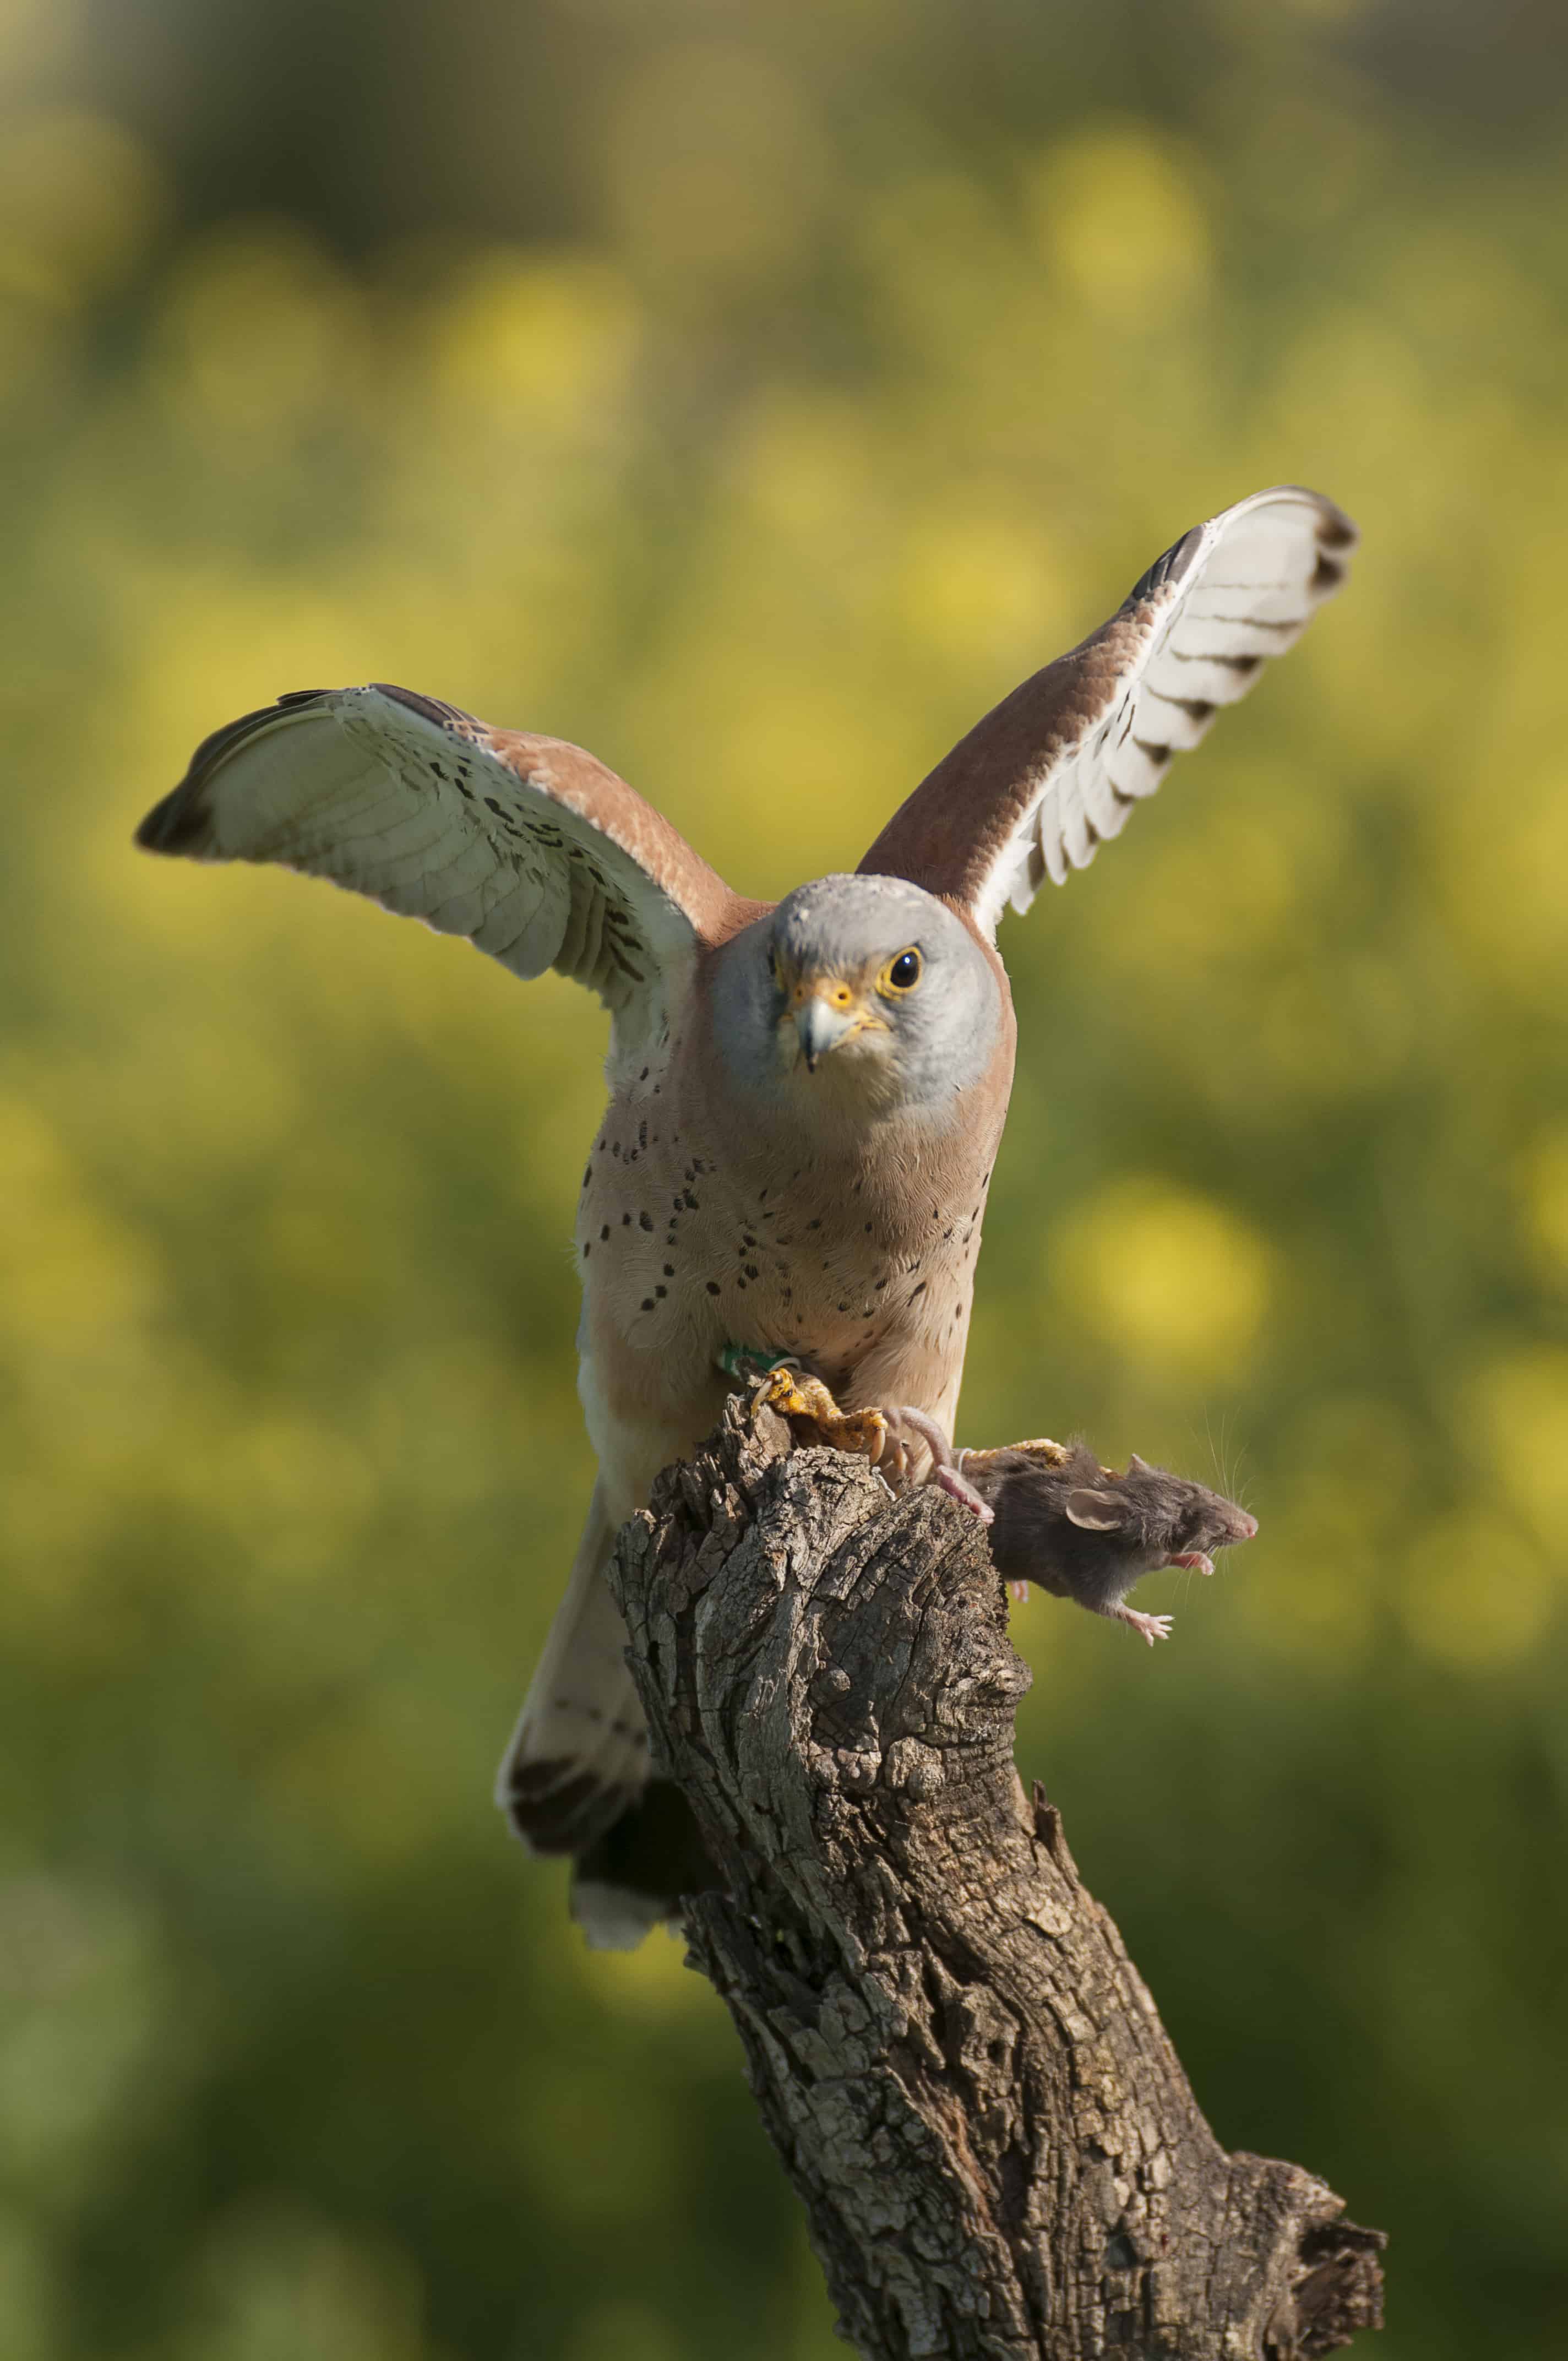 A Lesser Kestrel (Falco naumanni) falcon spreading its wings while sitting on a branch